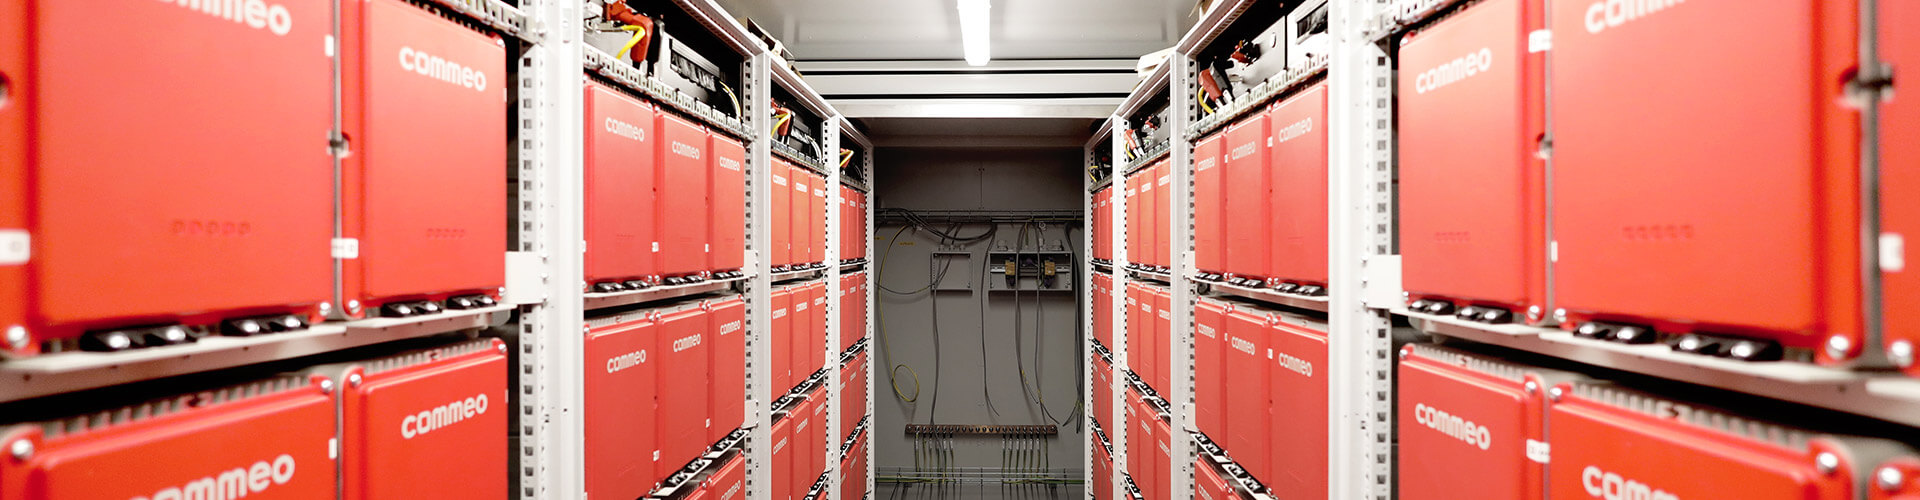 The picture shows the inside of the Commeo energy storage container.